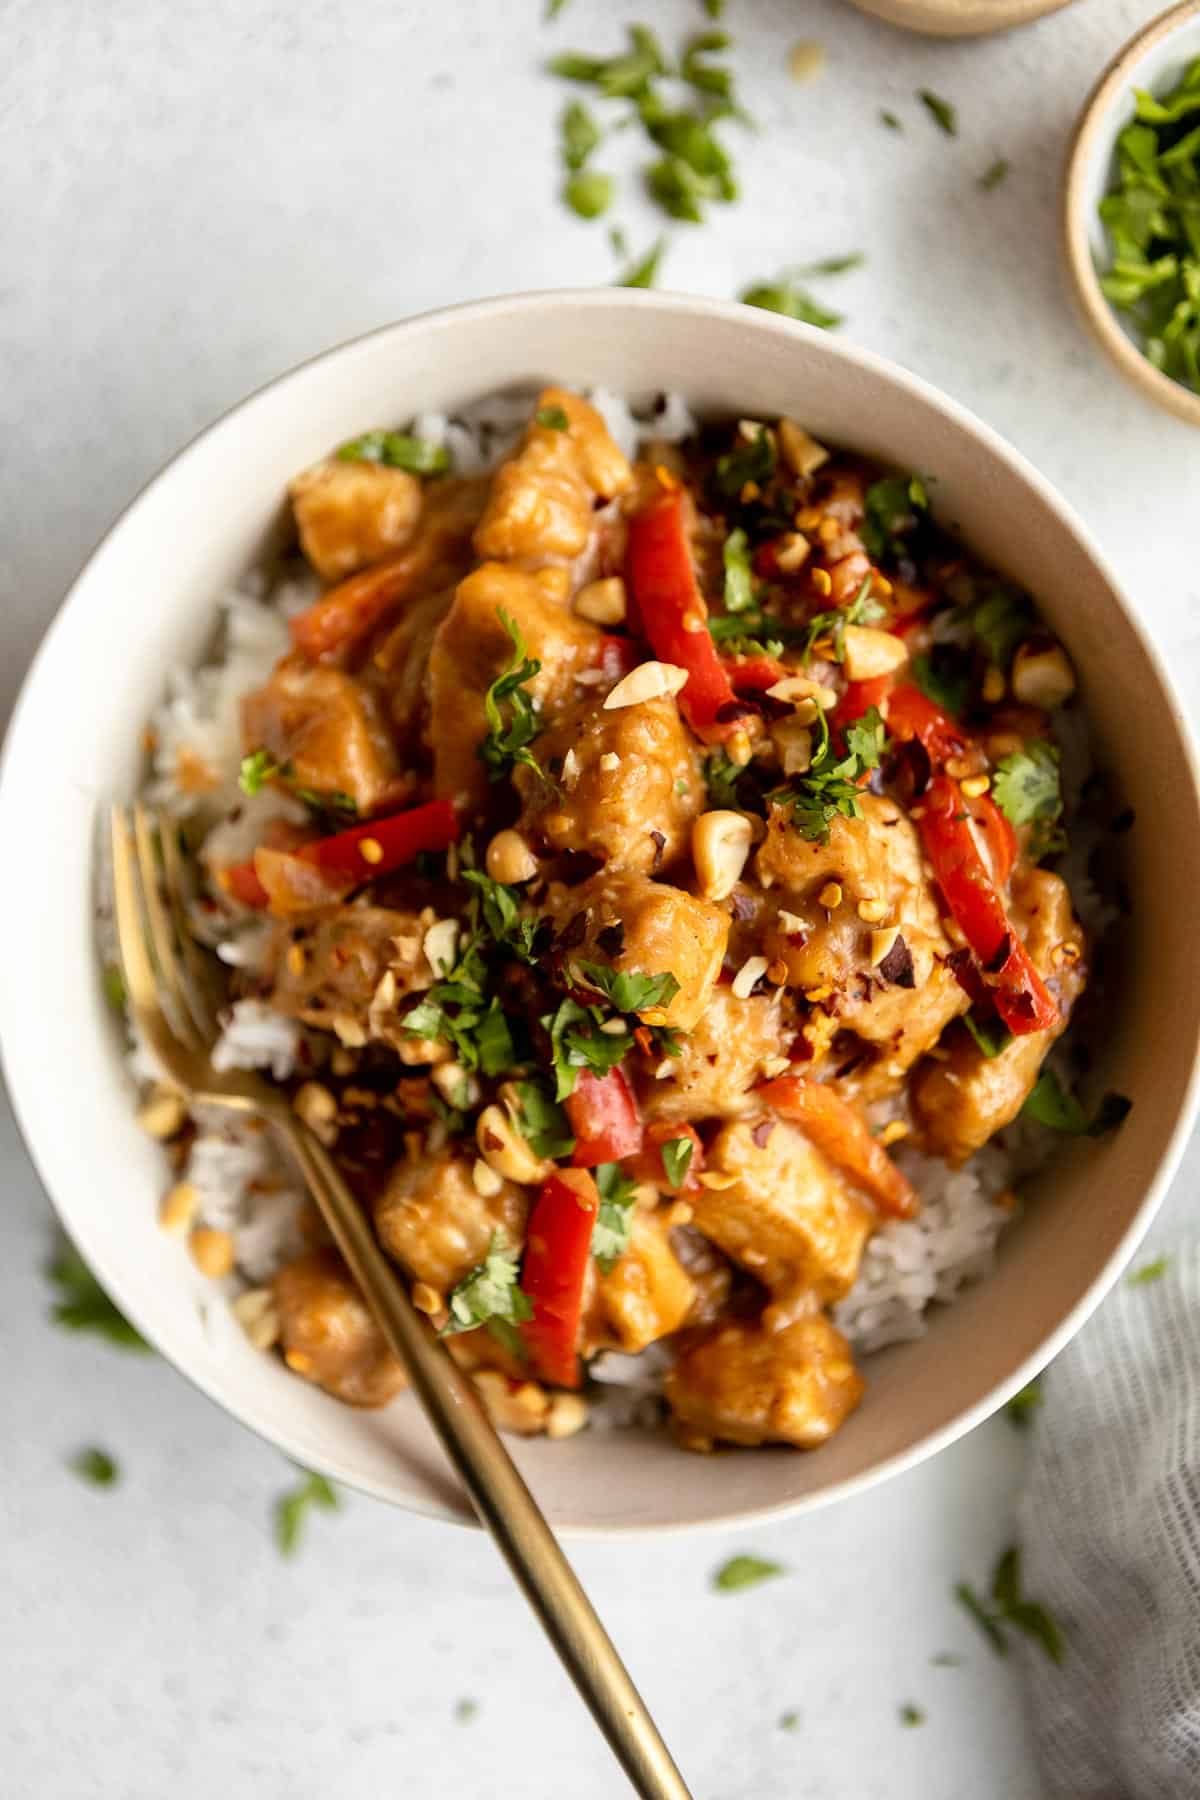 cooked peanut butter chicken with red peppers in a white bowl over white rice - one of the recipes for this week's healthy weekly meal plan